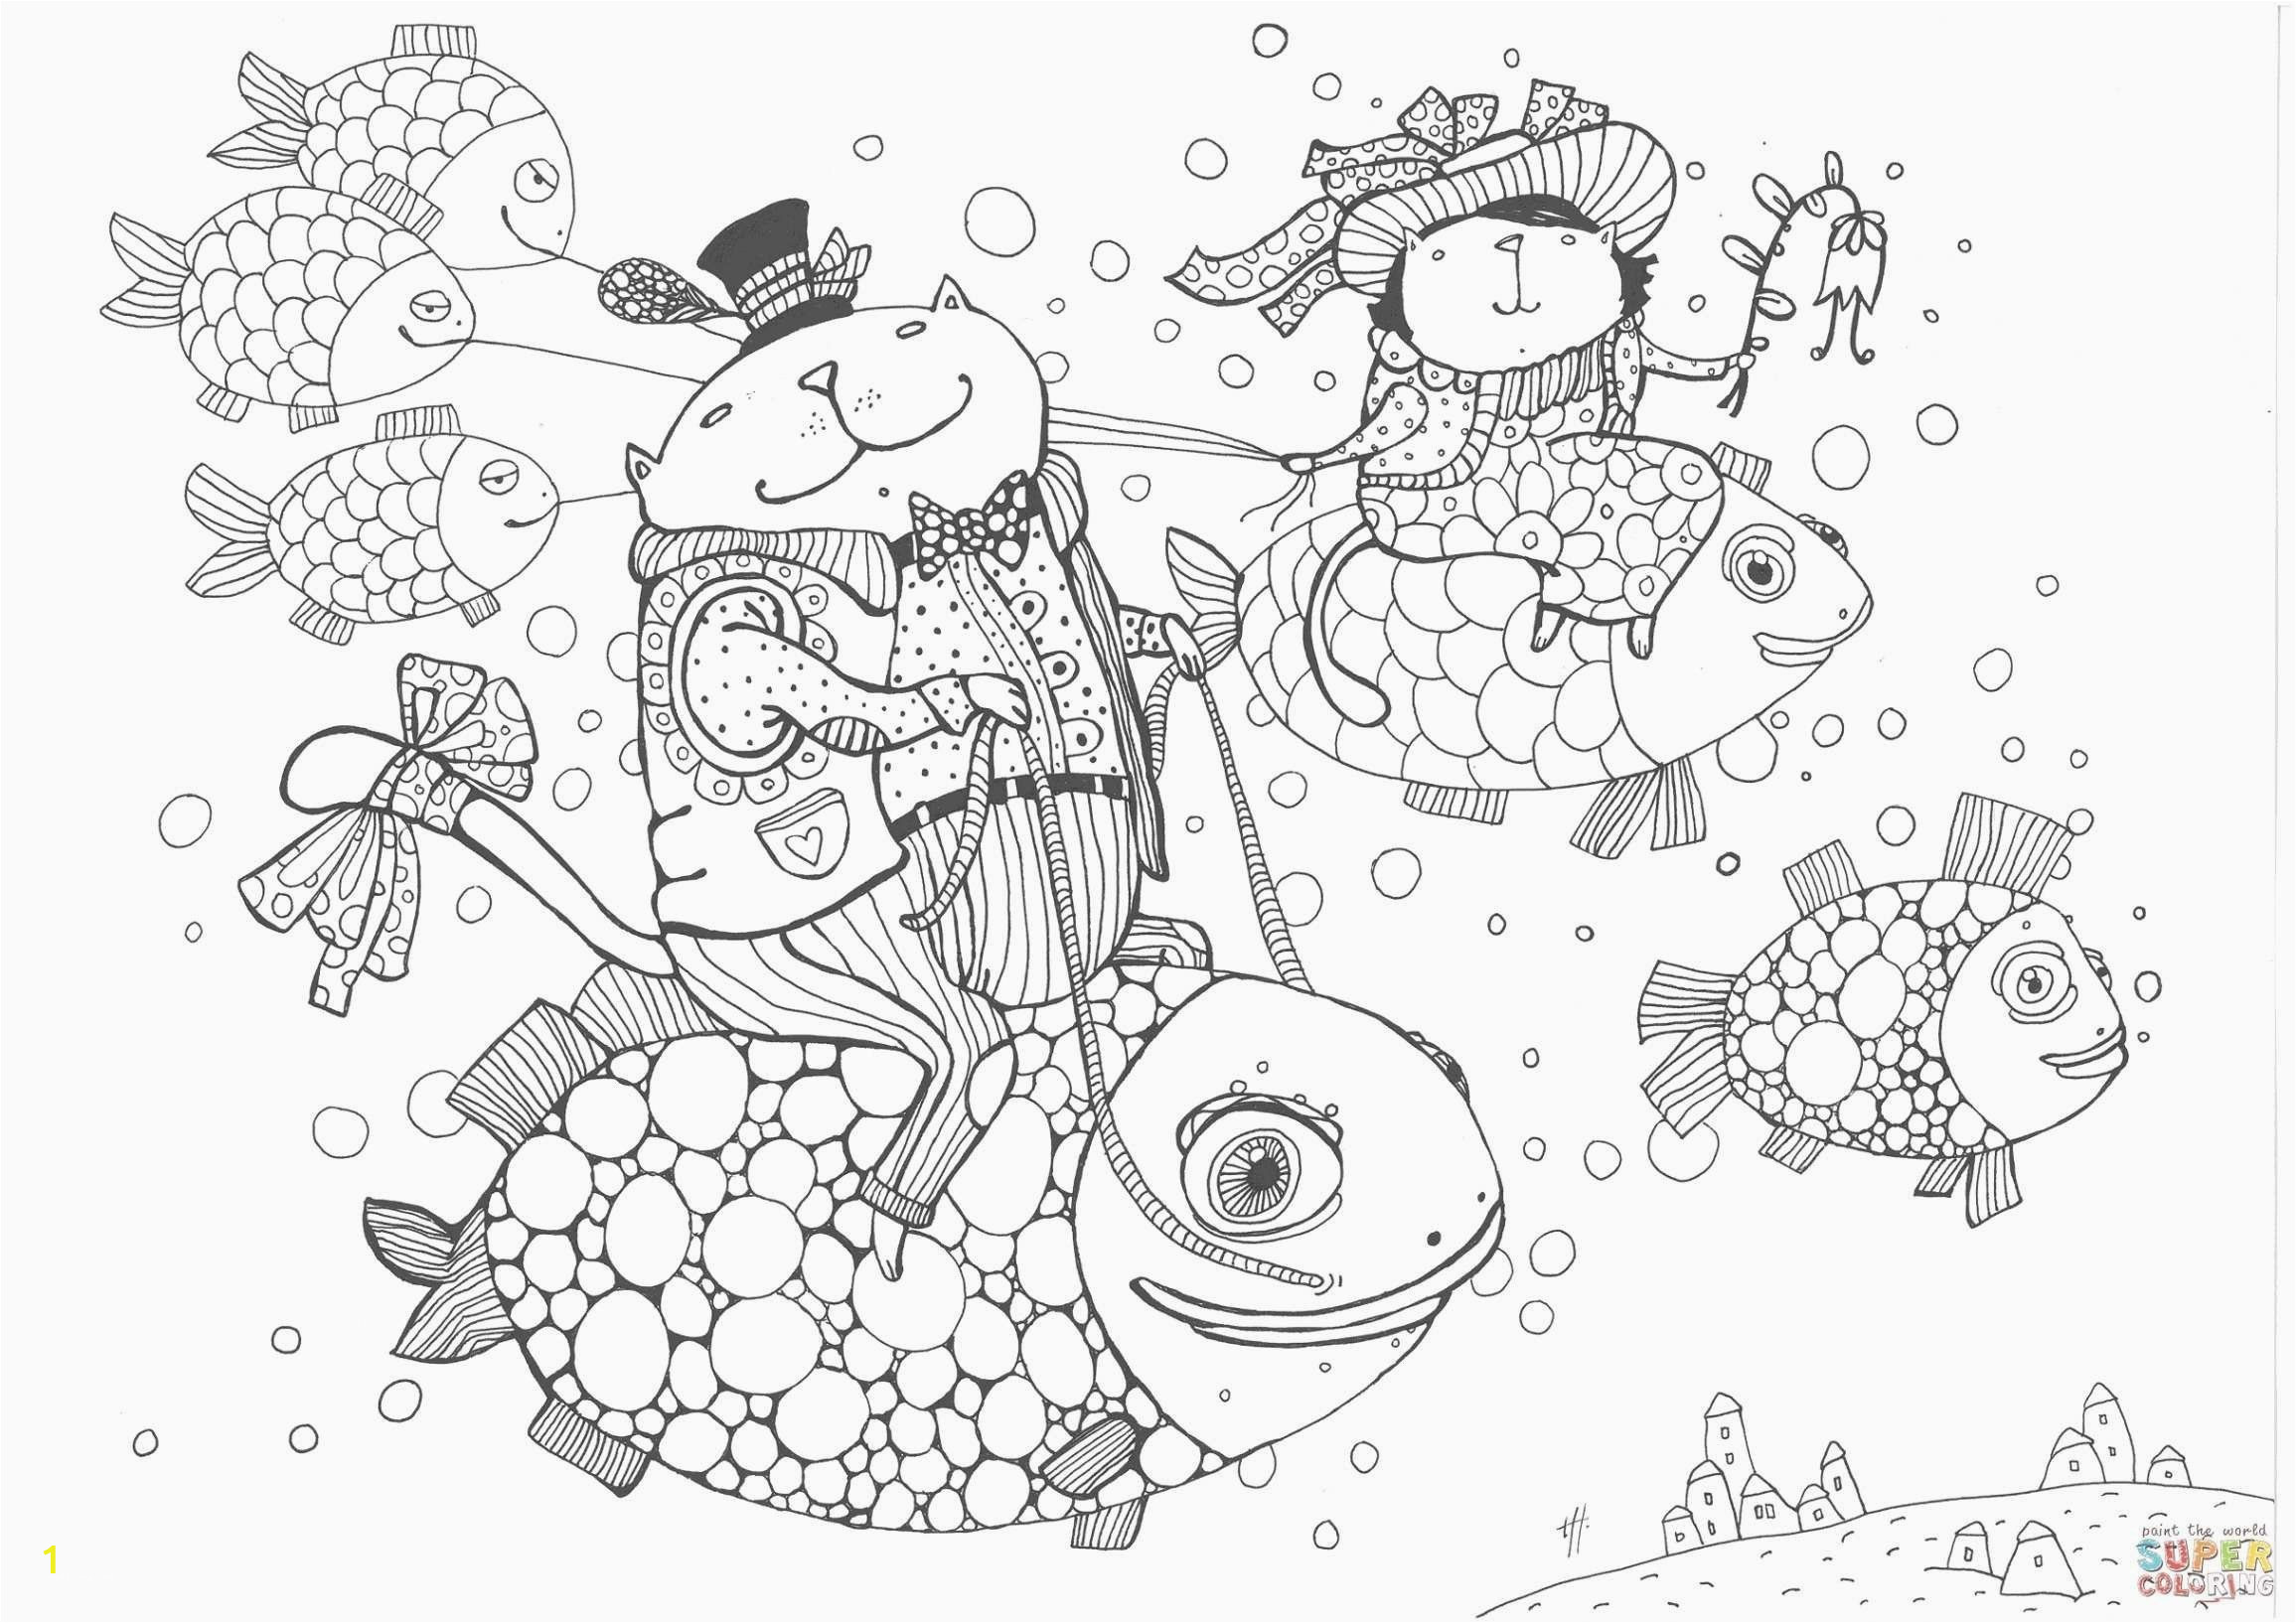 Nightmare before Christmas Coloring Pages Coloring Pages Childrens Printable Colouring Pages